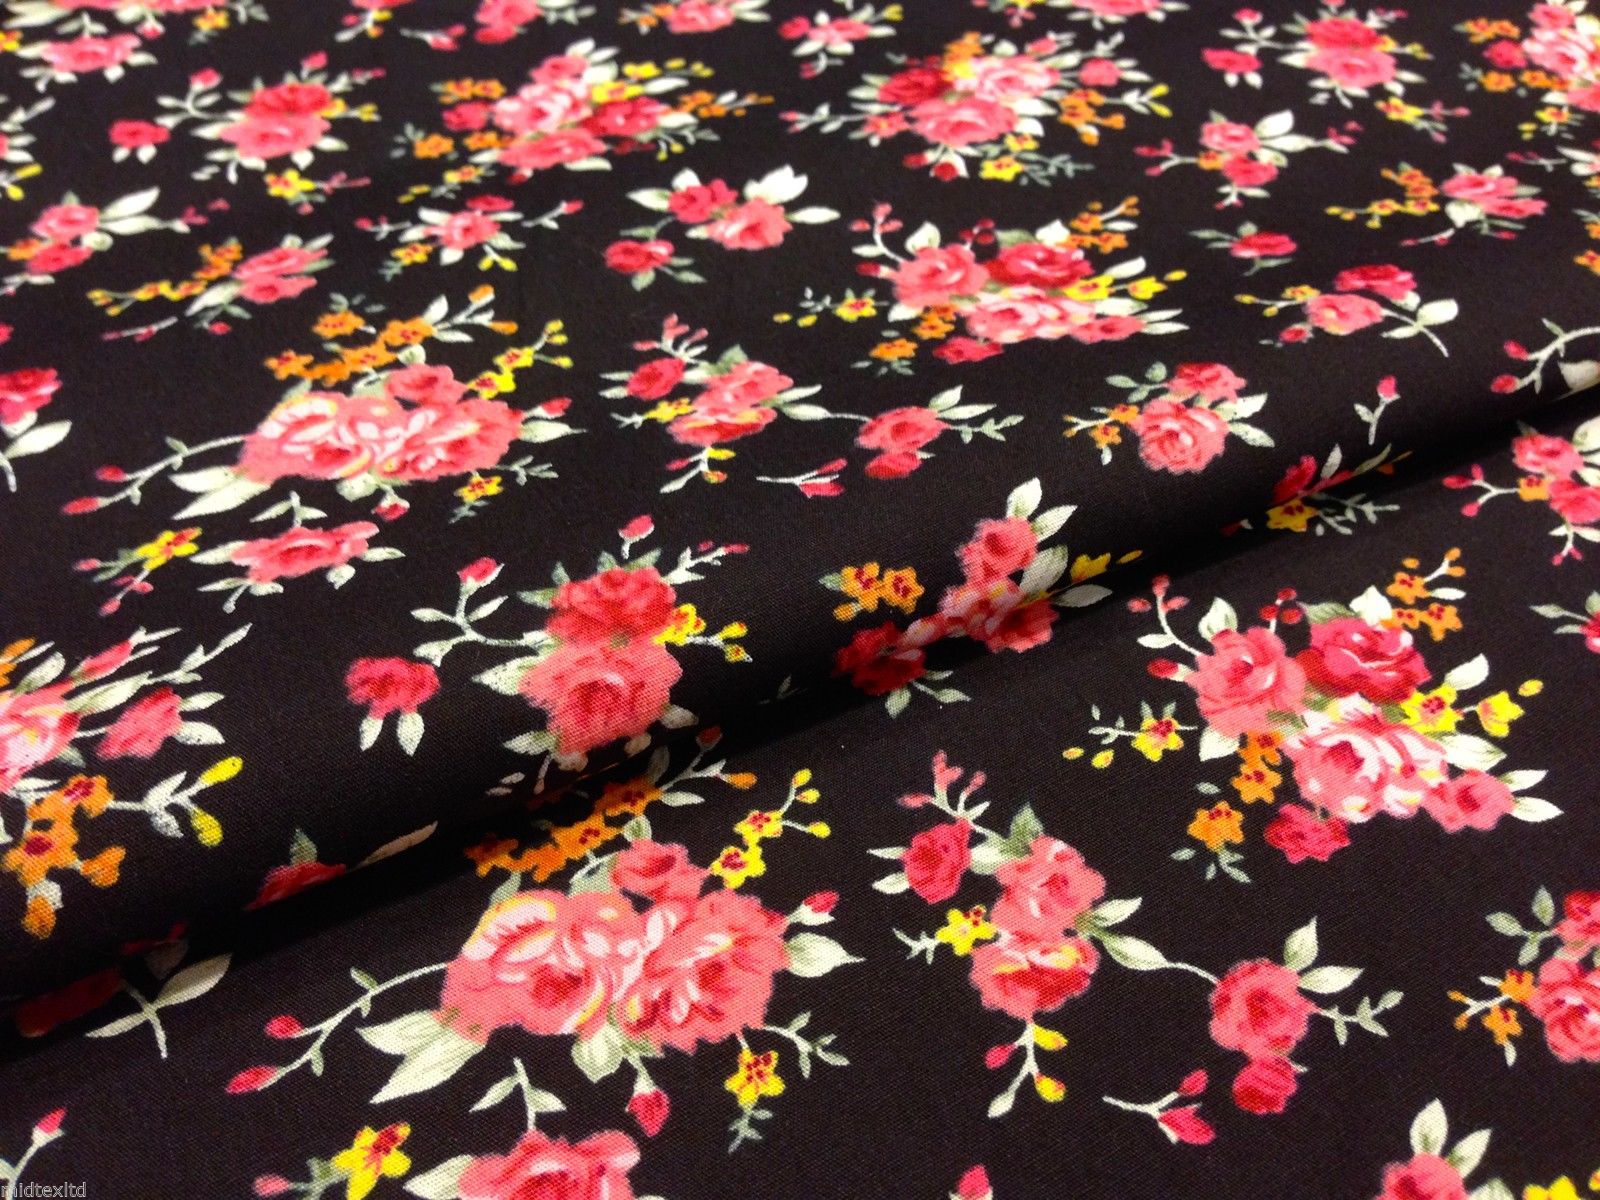 cath kidston Inspired Floral 100% Cotton Printed Fabric 58" Wide- Floral - Per Metre- M123 Mtex - Midland Textiles & Fabric